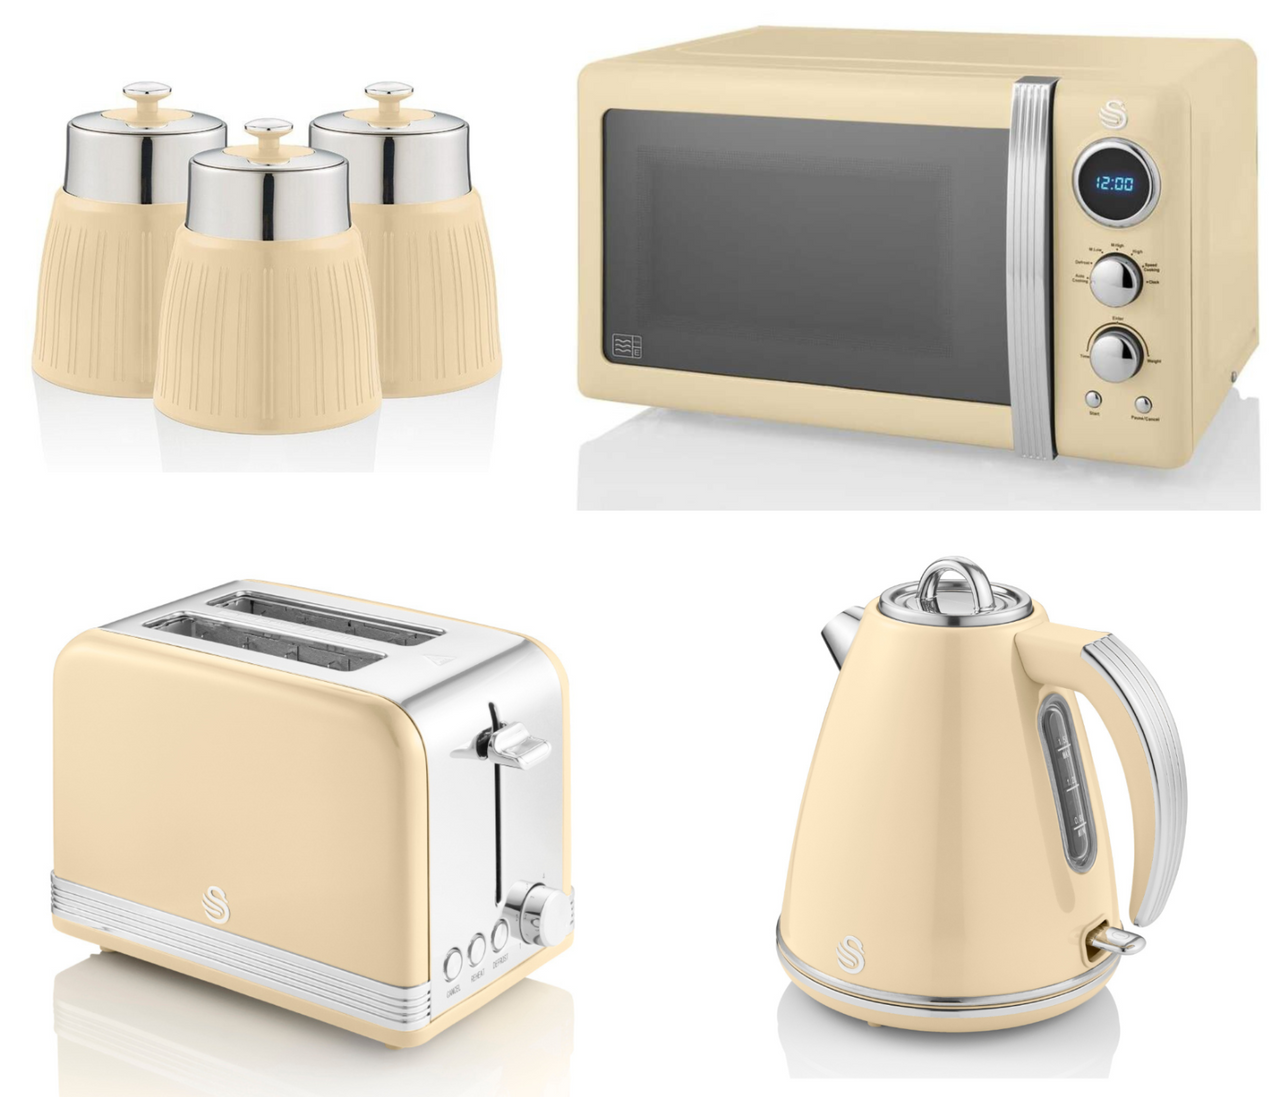 Swan Retro Cream 1.5L 3KW Jug Kettle, 2 Slice Toaster, 800W 20L Digital Microwave,  Tea, Coffee, Sugar Canisters. Vintage Matching Kitchen Set of 6 in Cream